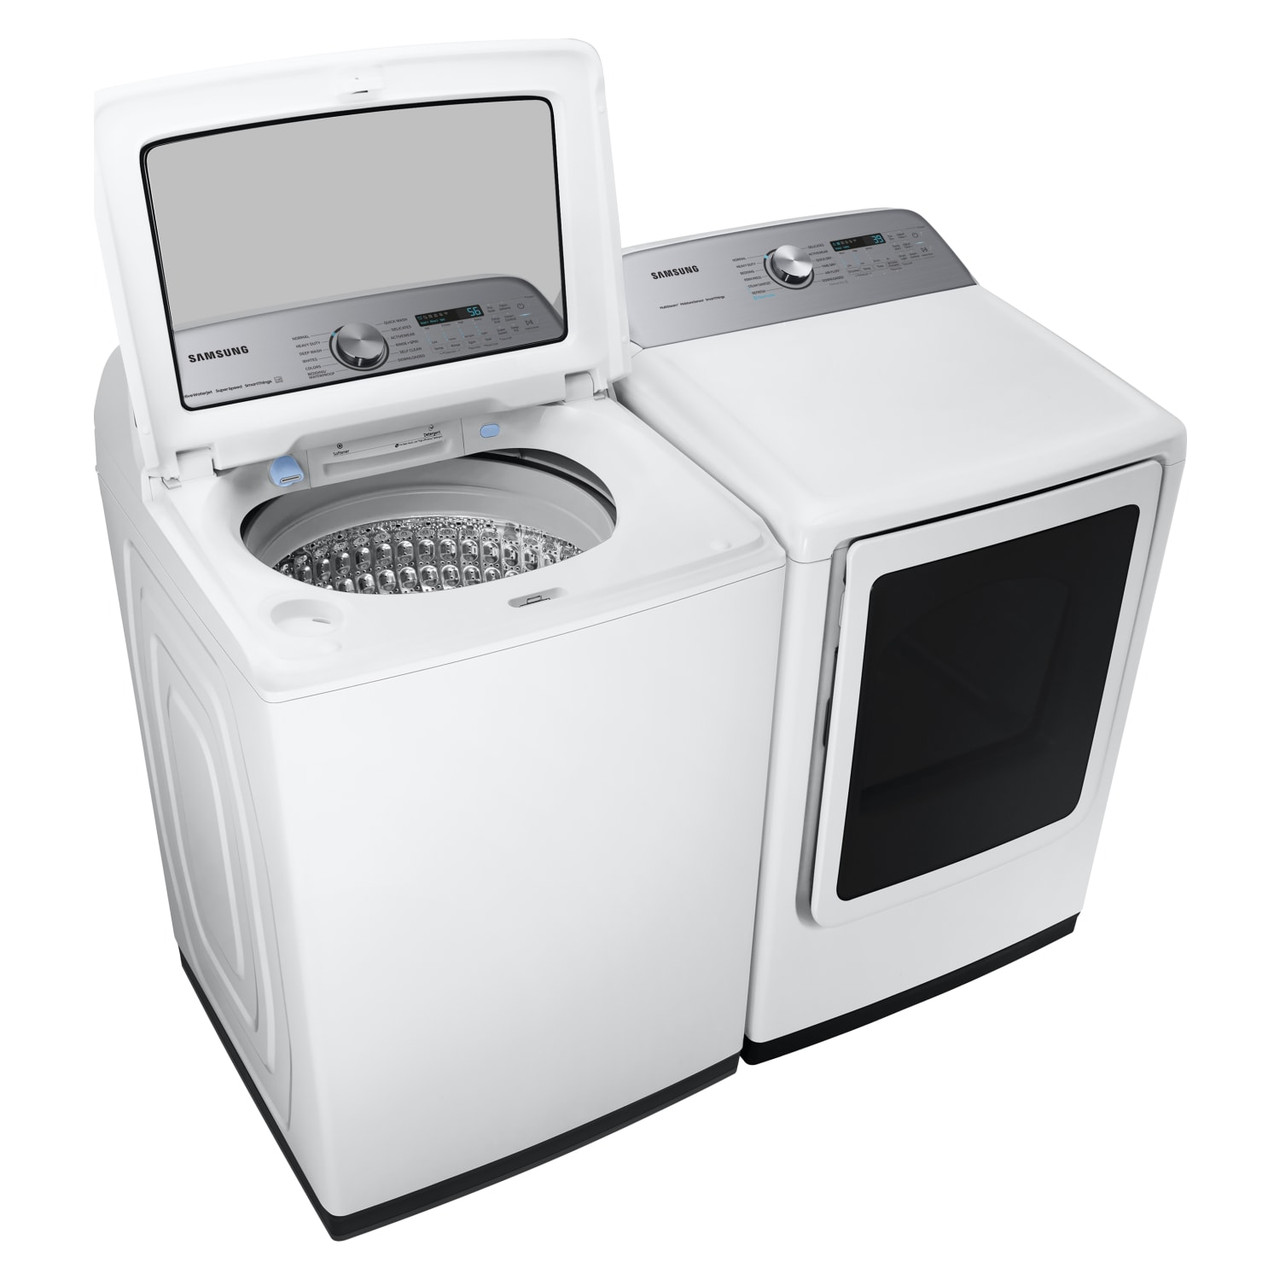 Samsung 4.9 cu. ft. Activewave Agitator TL washer w/ Active WaterJet - White